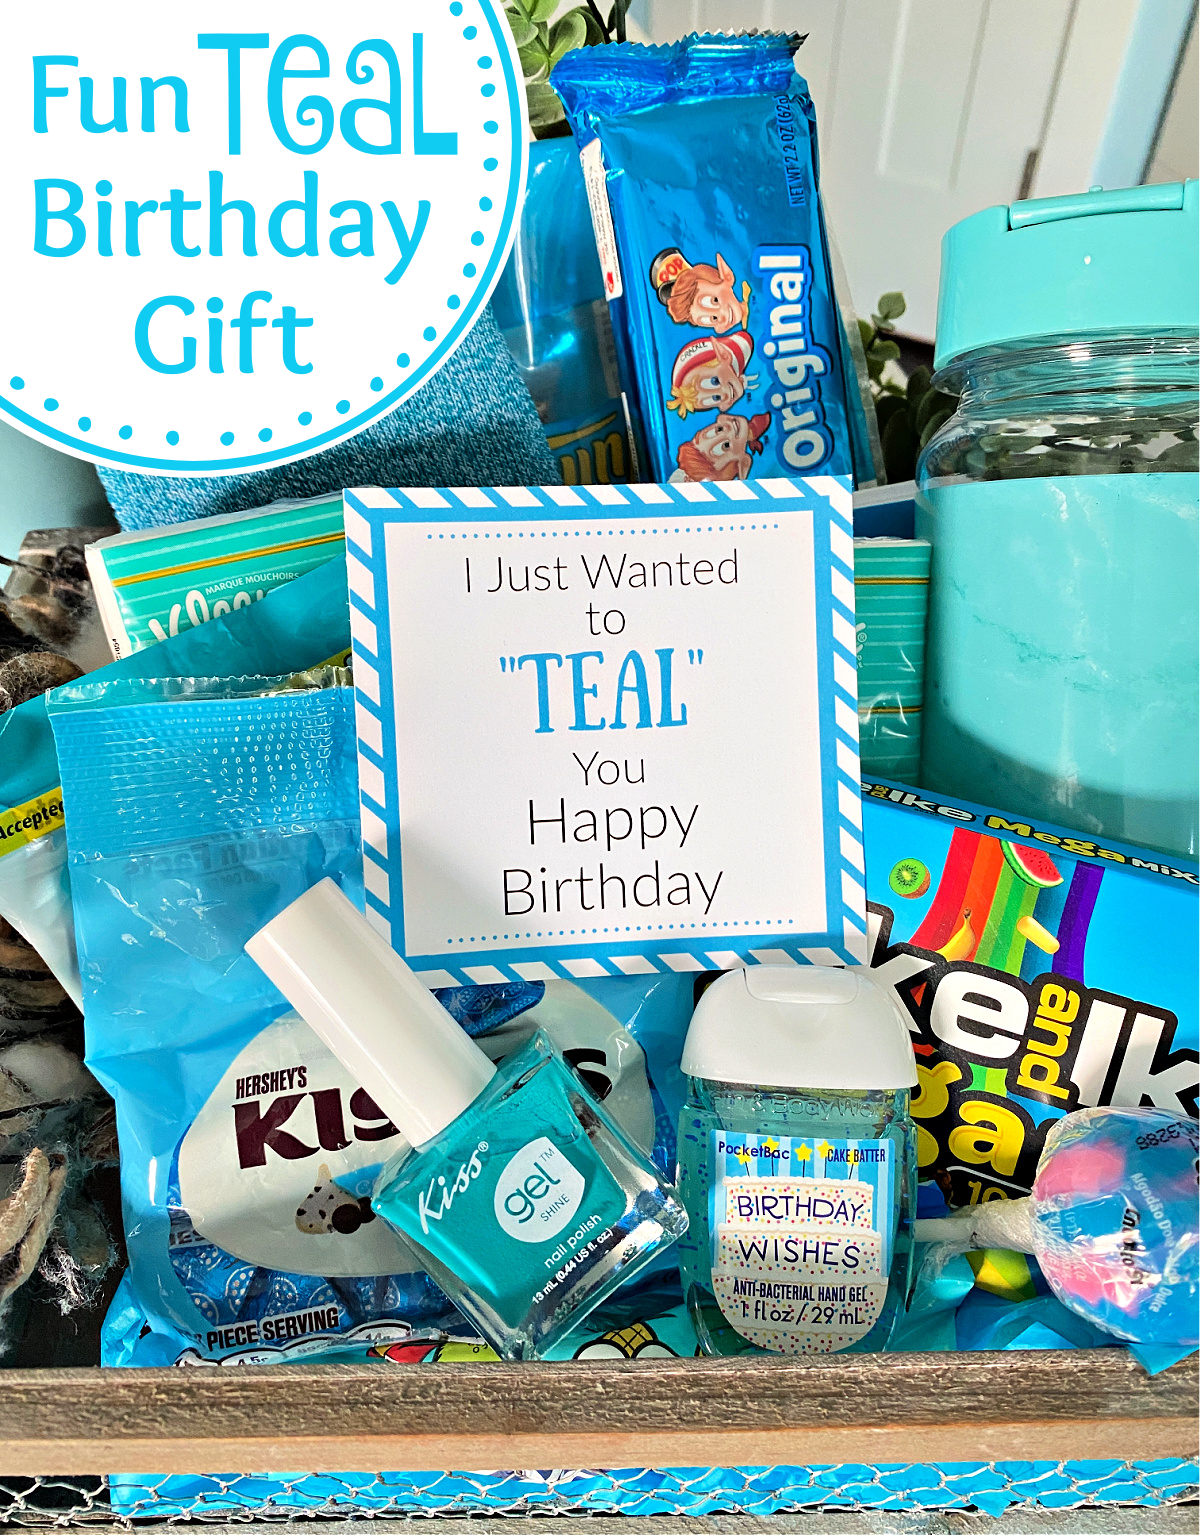 https://fun-squared.com/wp-content/uploads/2017/02/Teal-you-Happy-Birthday-1.png.webp